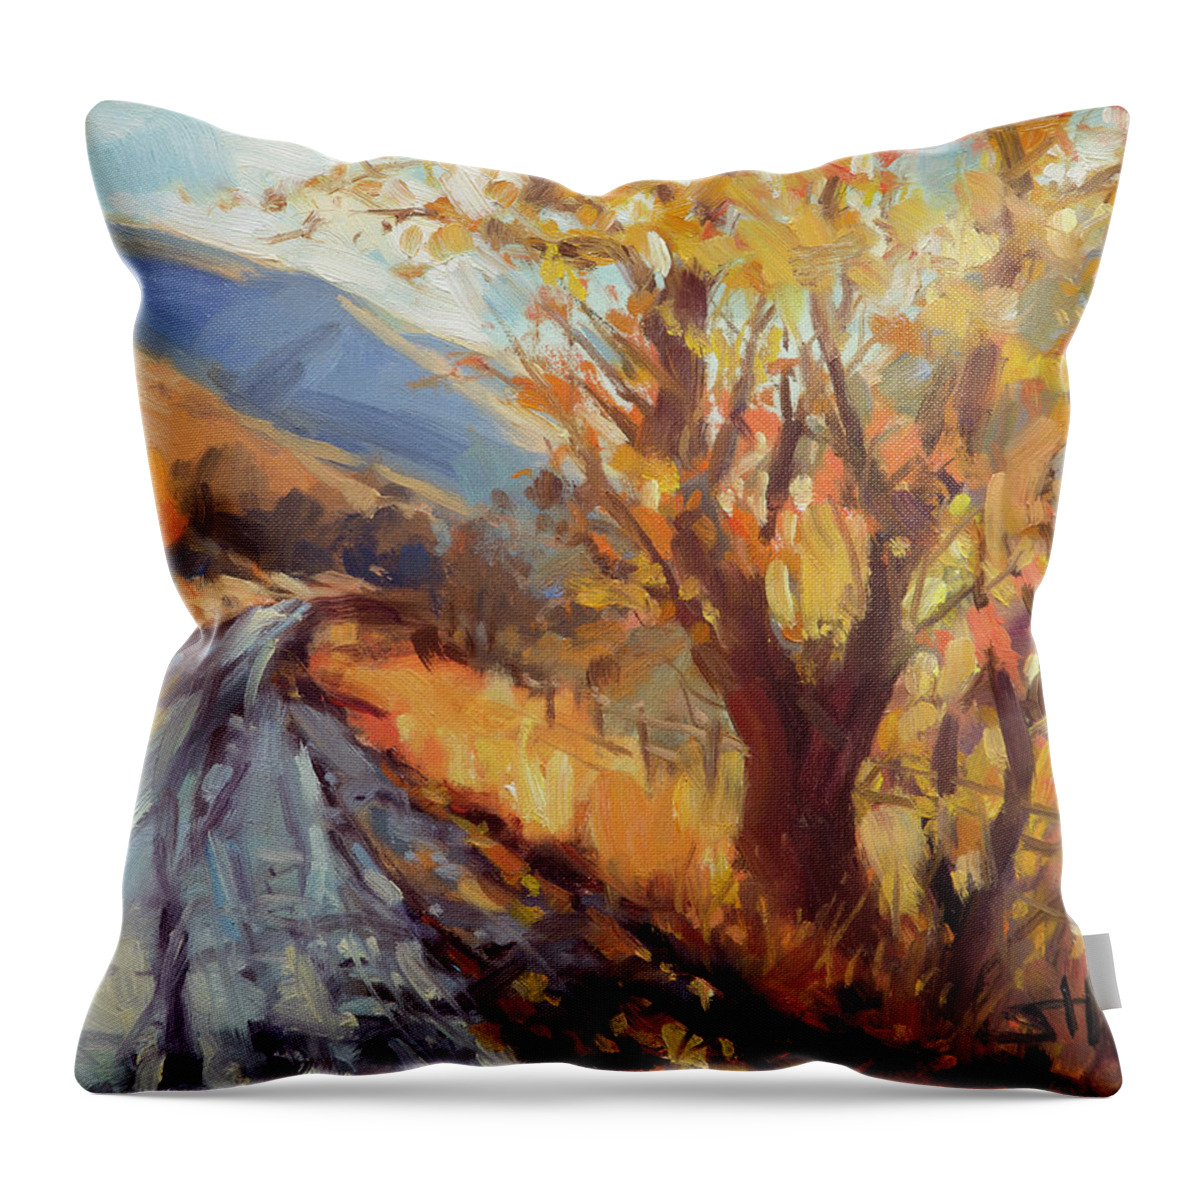 Country Throw Pillow featuring the painting After an Autumn Rain by Steve Henderson